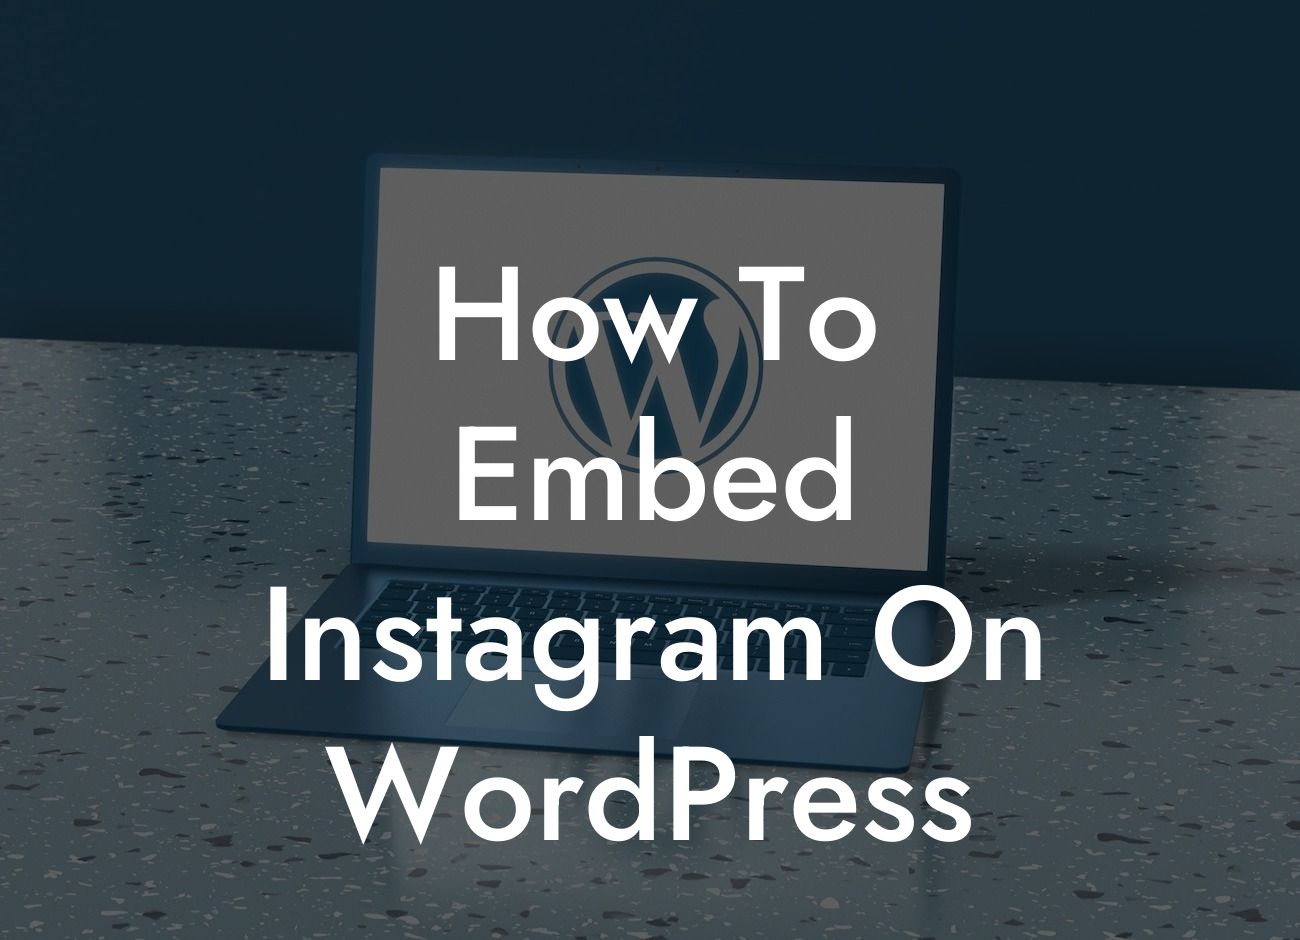 How To Embed Instagram On WordPress